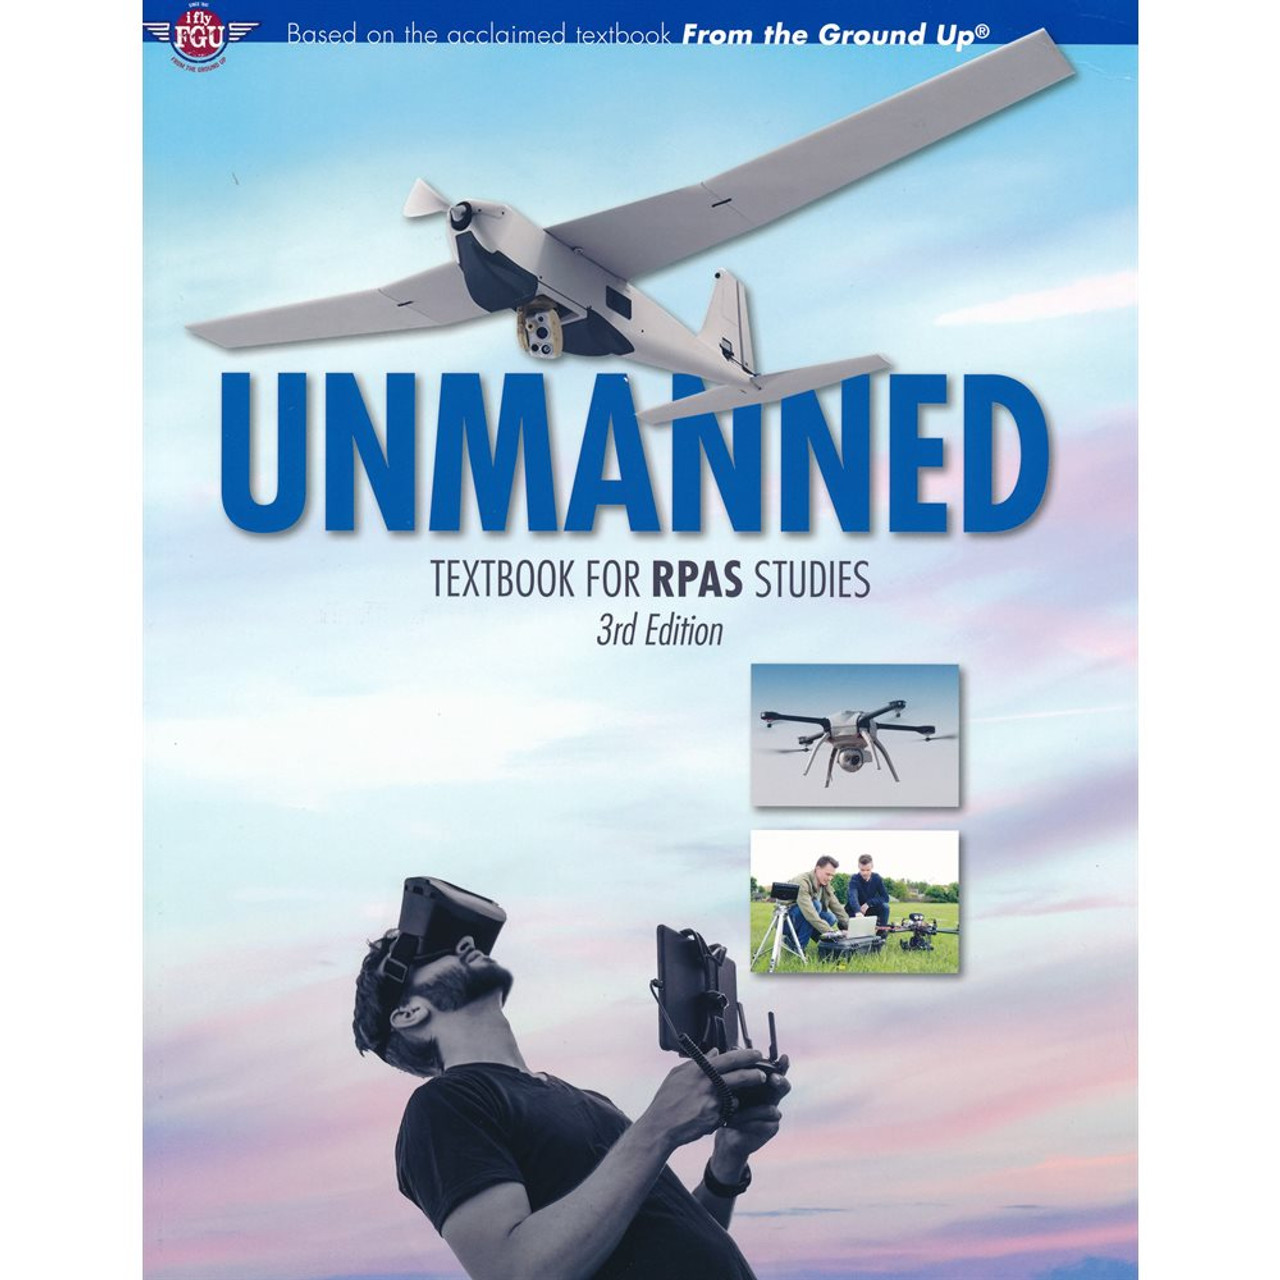 Unmanned Textbook for RPAS Studies